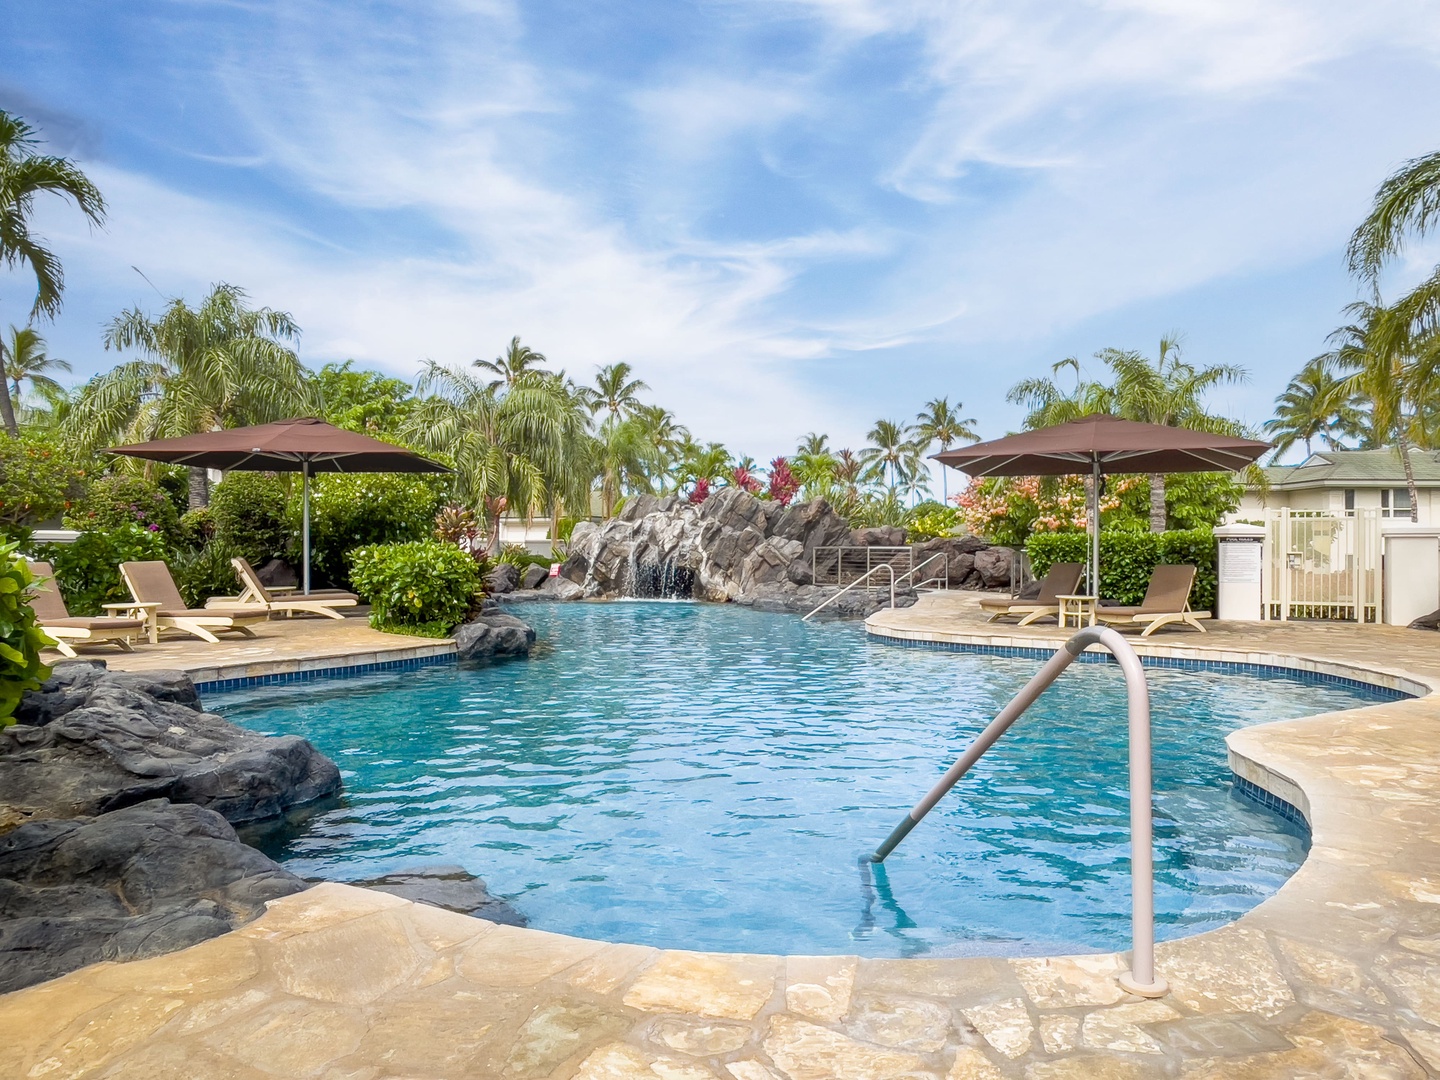 Kamuela Vacation Rentals, The Islands D3 - Beautiful Lagoon-Style Pool Just Steps from the Front Door!